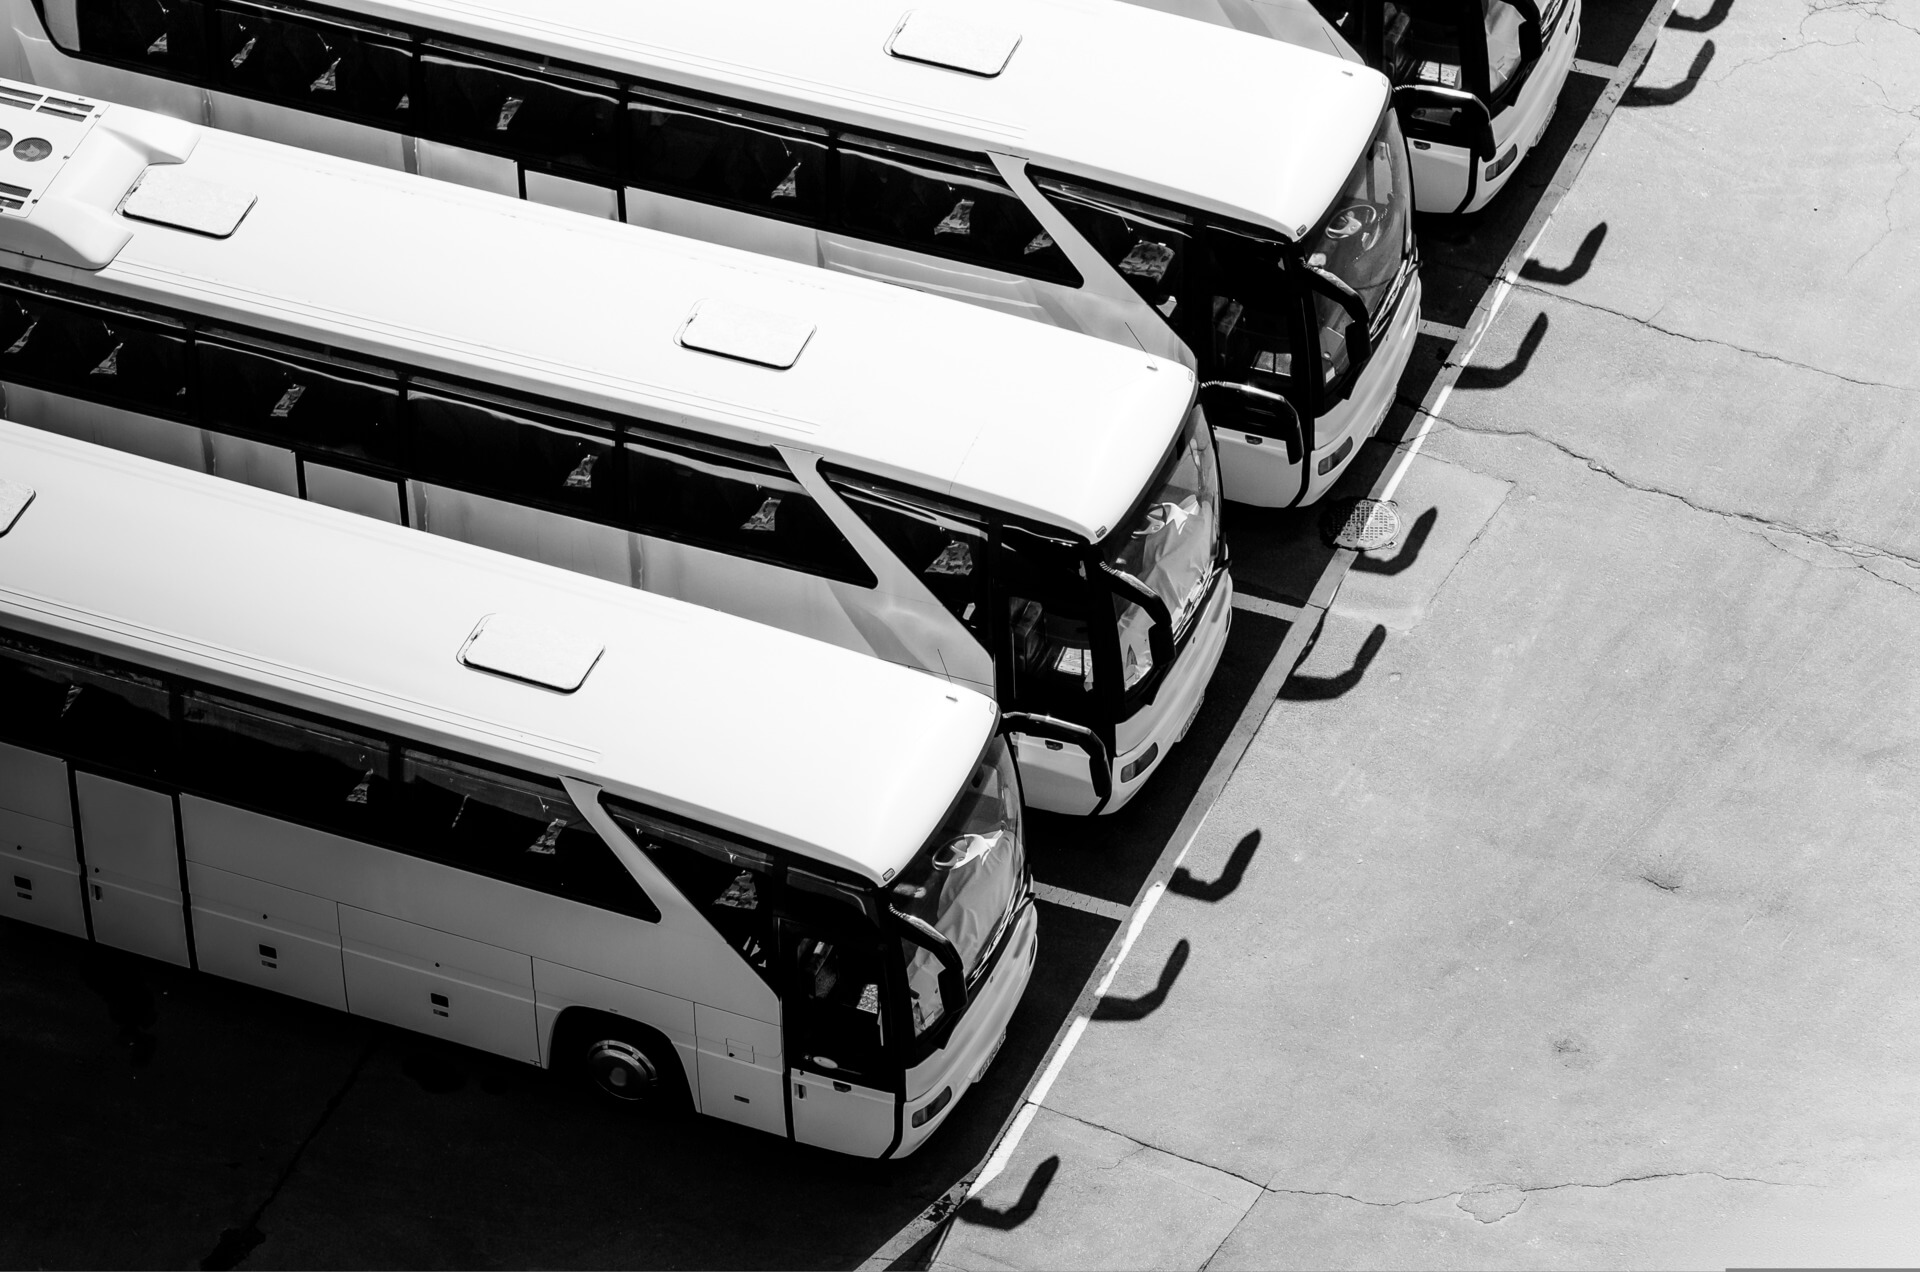 white buses parked